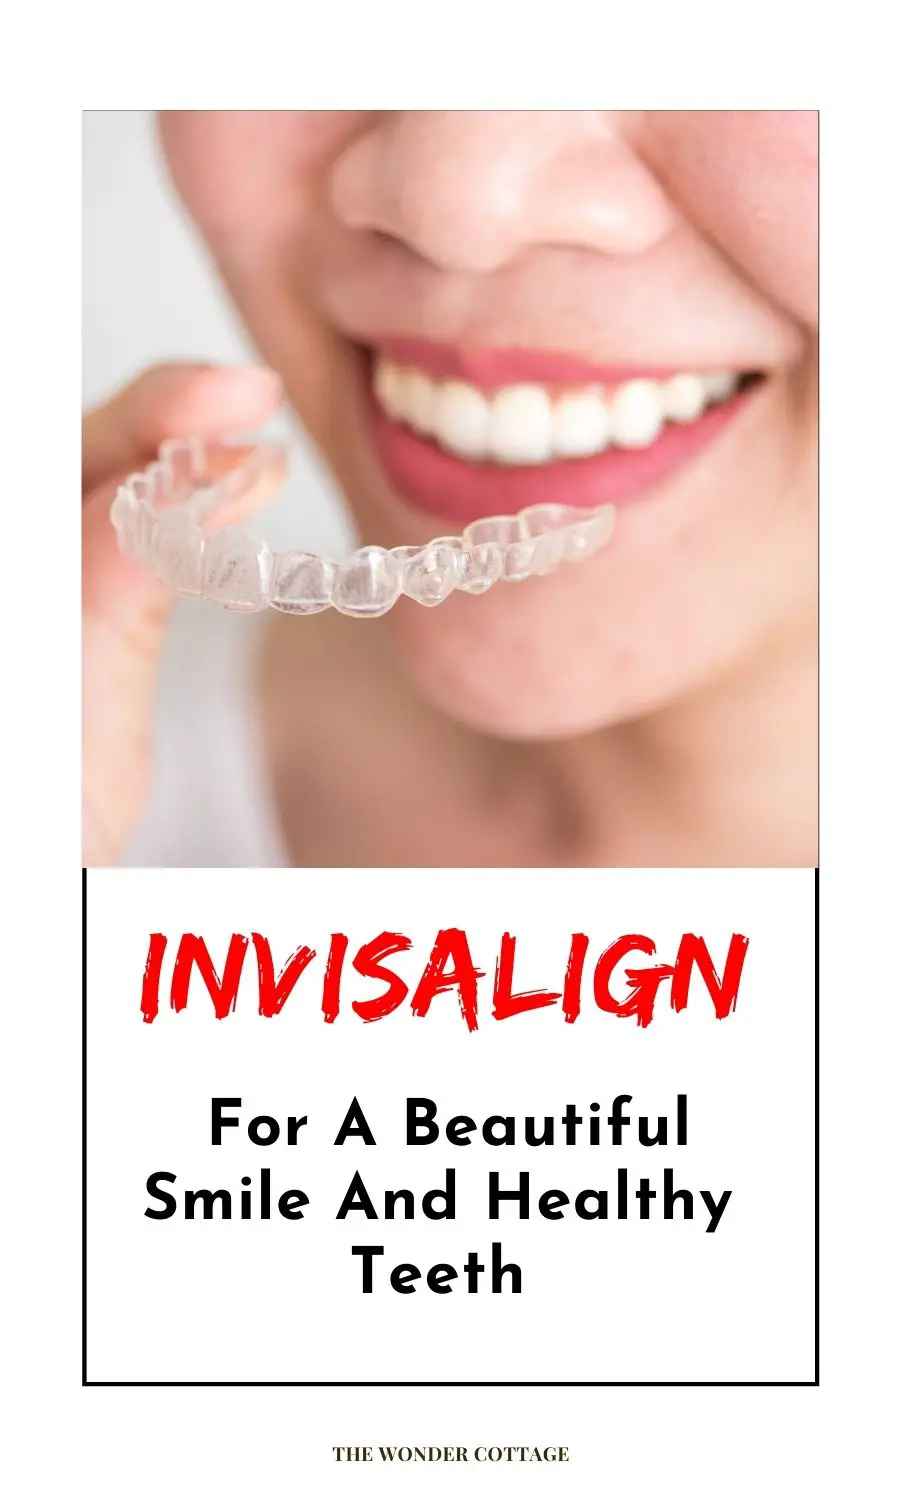 Invisalign For A Beautiful Smile And Healthy Teeth